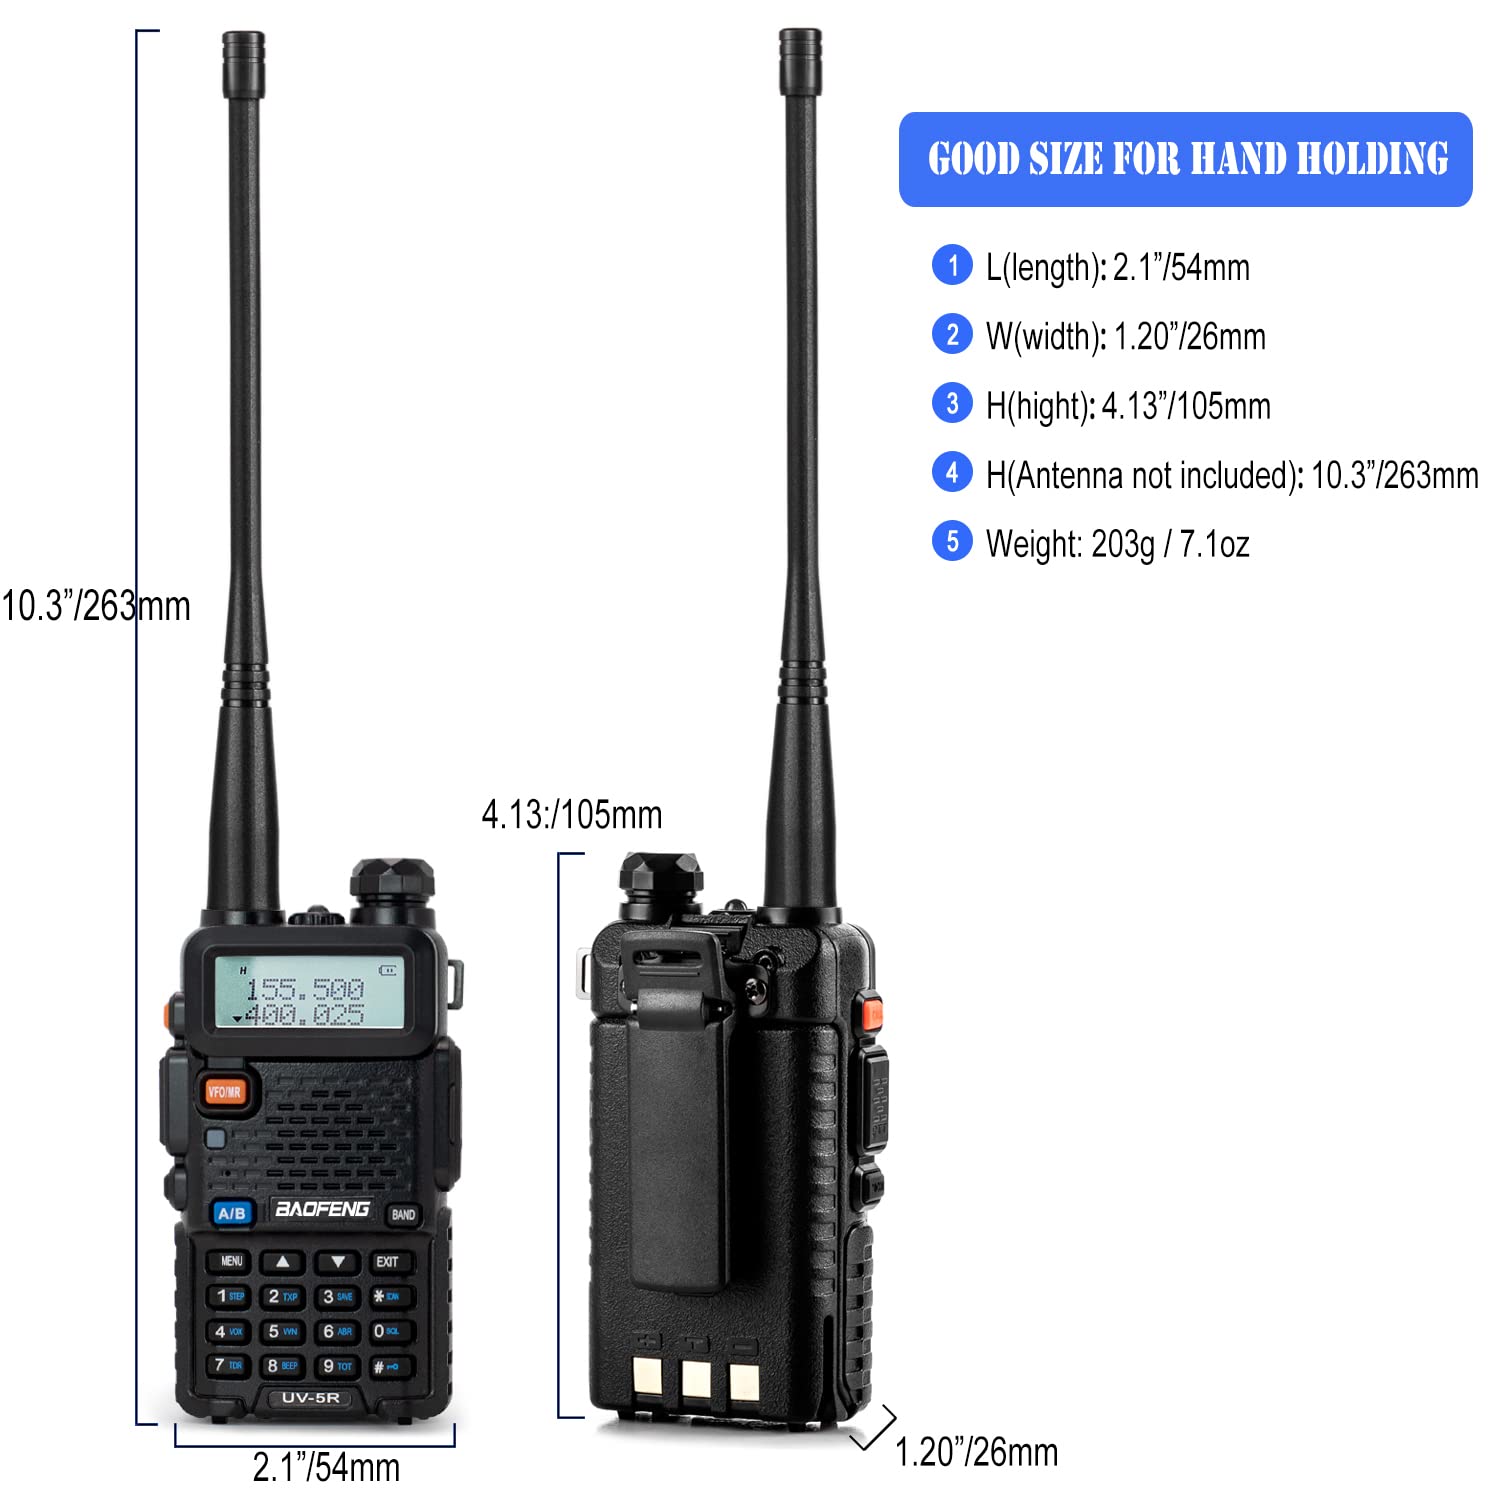 BAOFENG UV-5R Radio (VHF & UHF) with 2 Rechargeable Batteries, Long Range Handheld Ham Radios with High Gain Long Antenna and Earpiece(2 Pack)